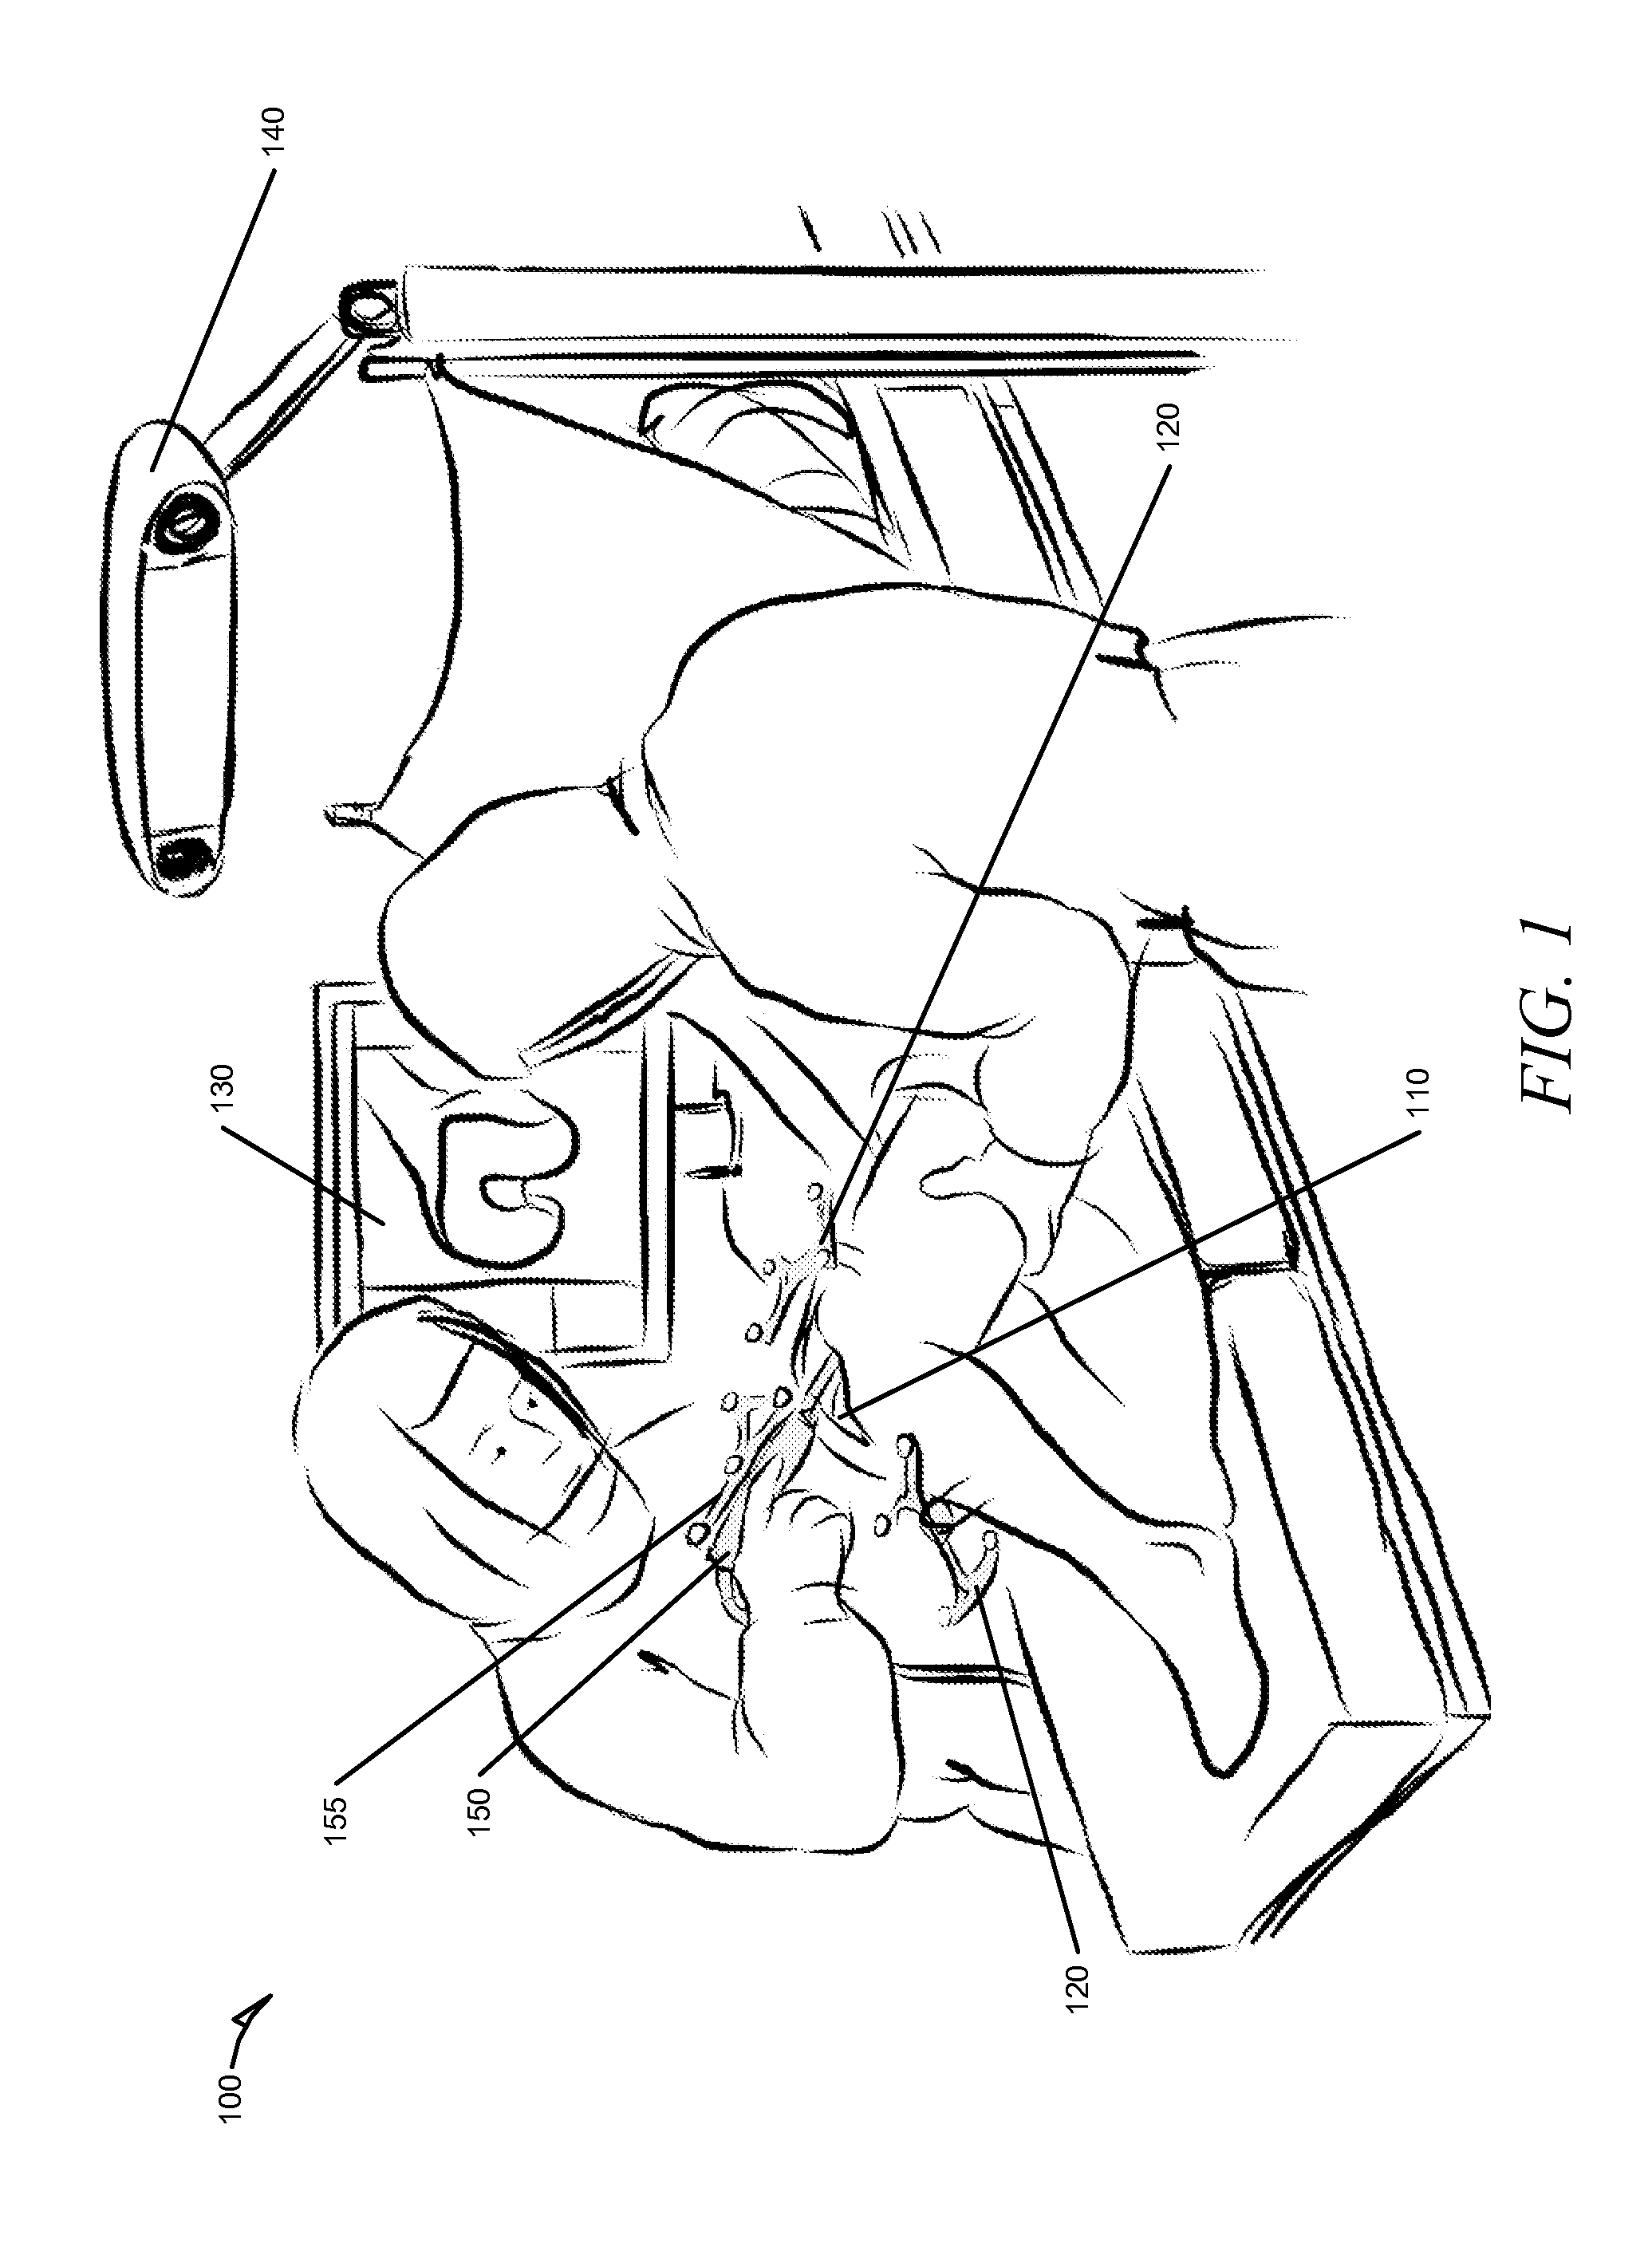 Systems and methods for planning and performing image free implant revision surgery